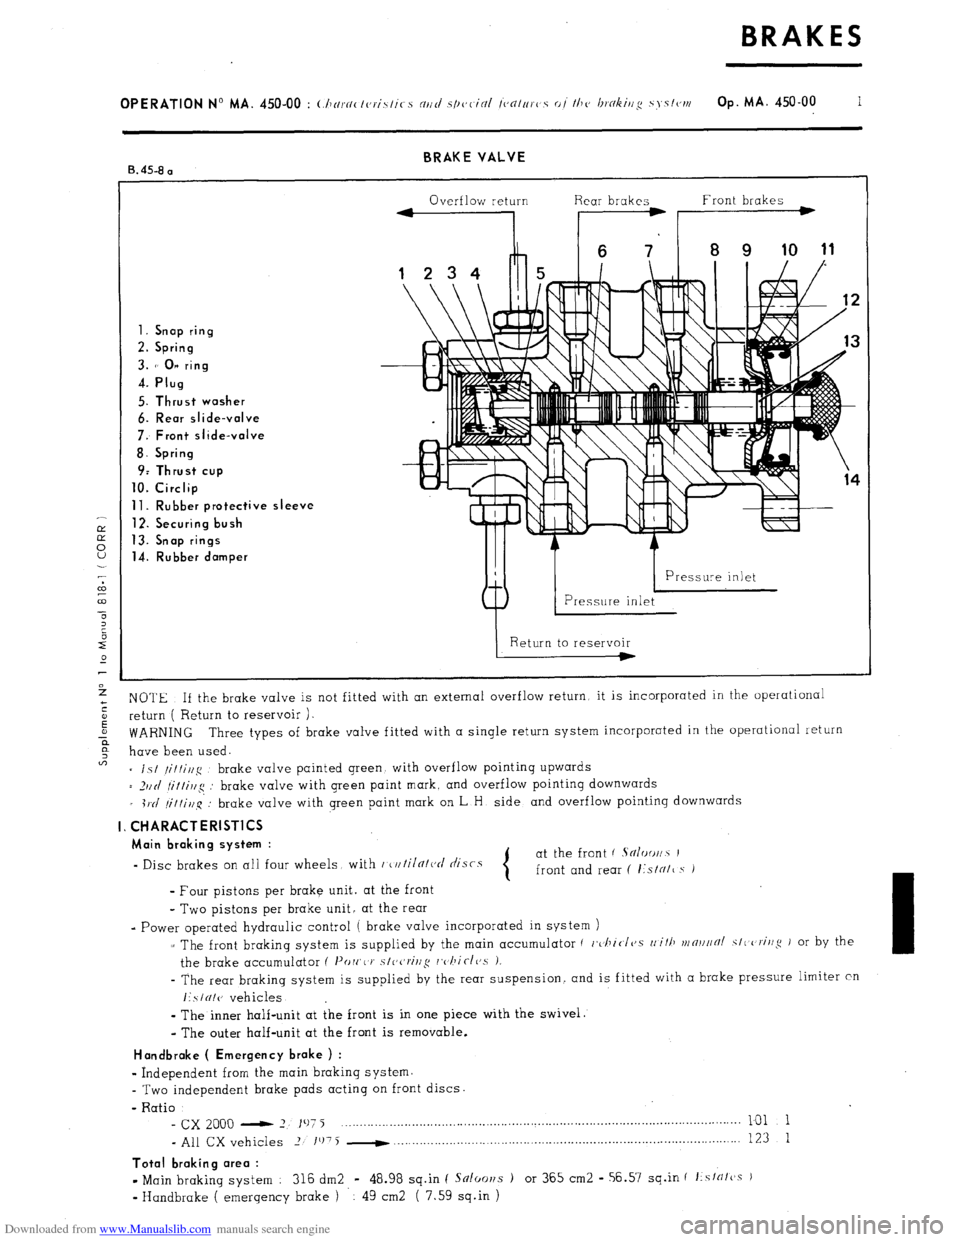 Citroen CX 1982 1.G User Guide Downloaded from www.Manualslib.com manuals search engine BRAKE VALVE 
B. 45-8 a 
Overflow return Rear brakes Front brakes 
1. Snap ring 
2. Spring 
3. 1’ 0” ring 
4. Plug 
5. Thrust washer 
6. Rea